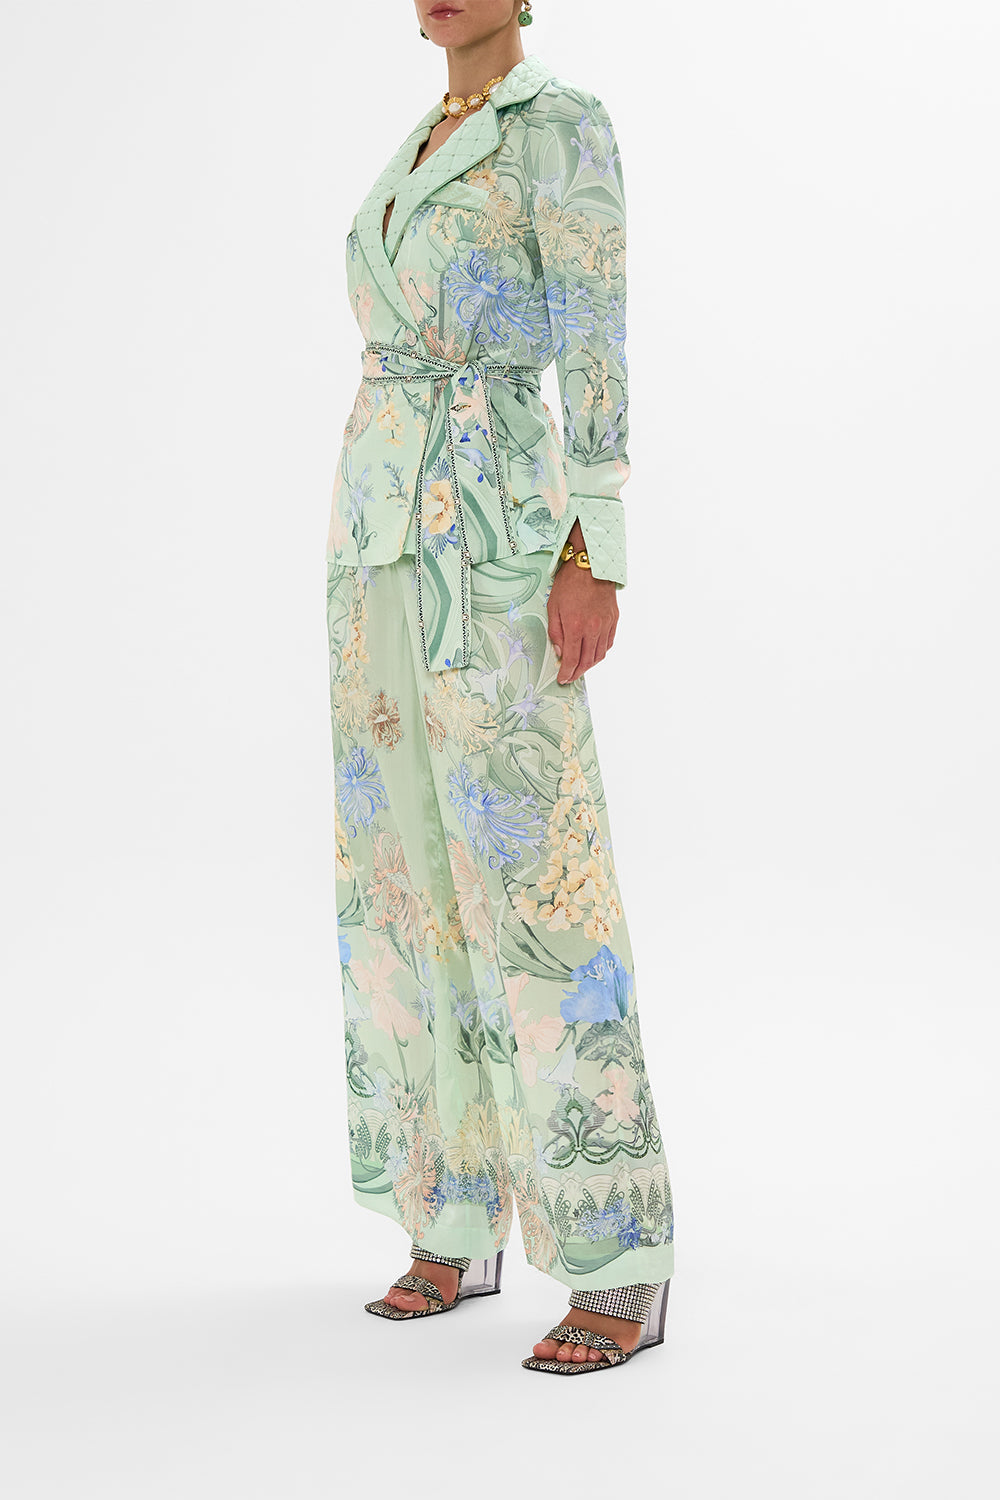 CAMILLA Floral Pajama Suit Jacket in Dreaming in Dutch